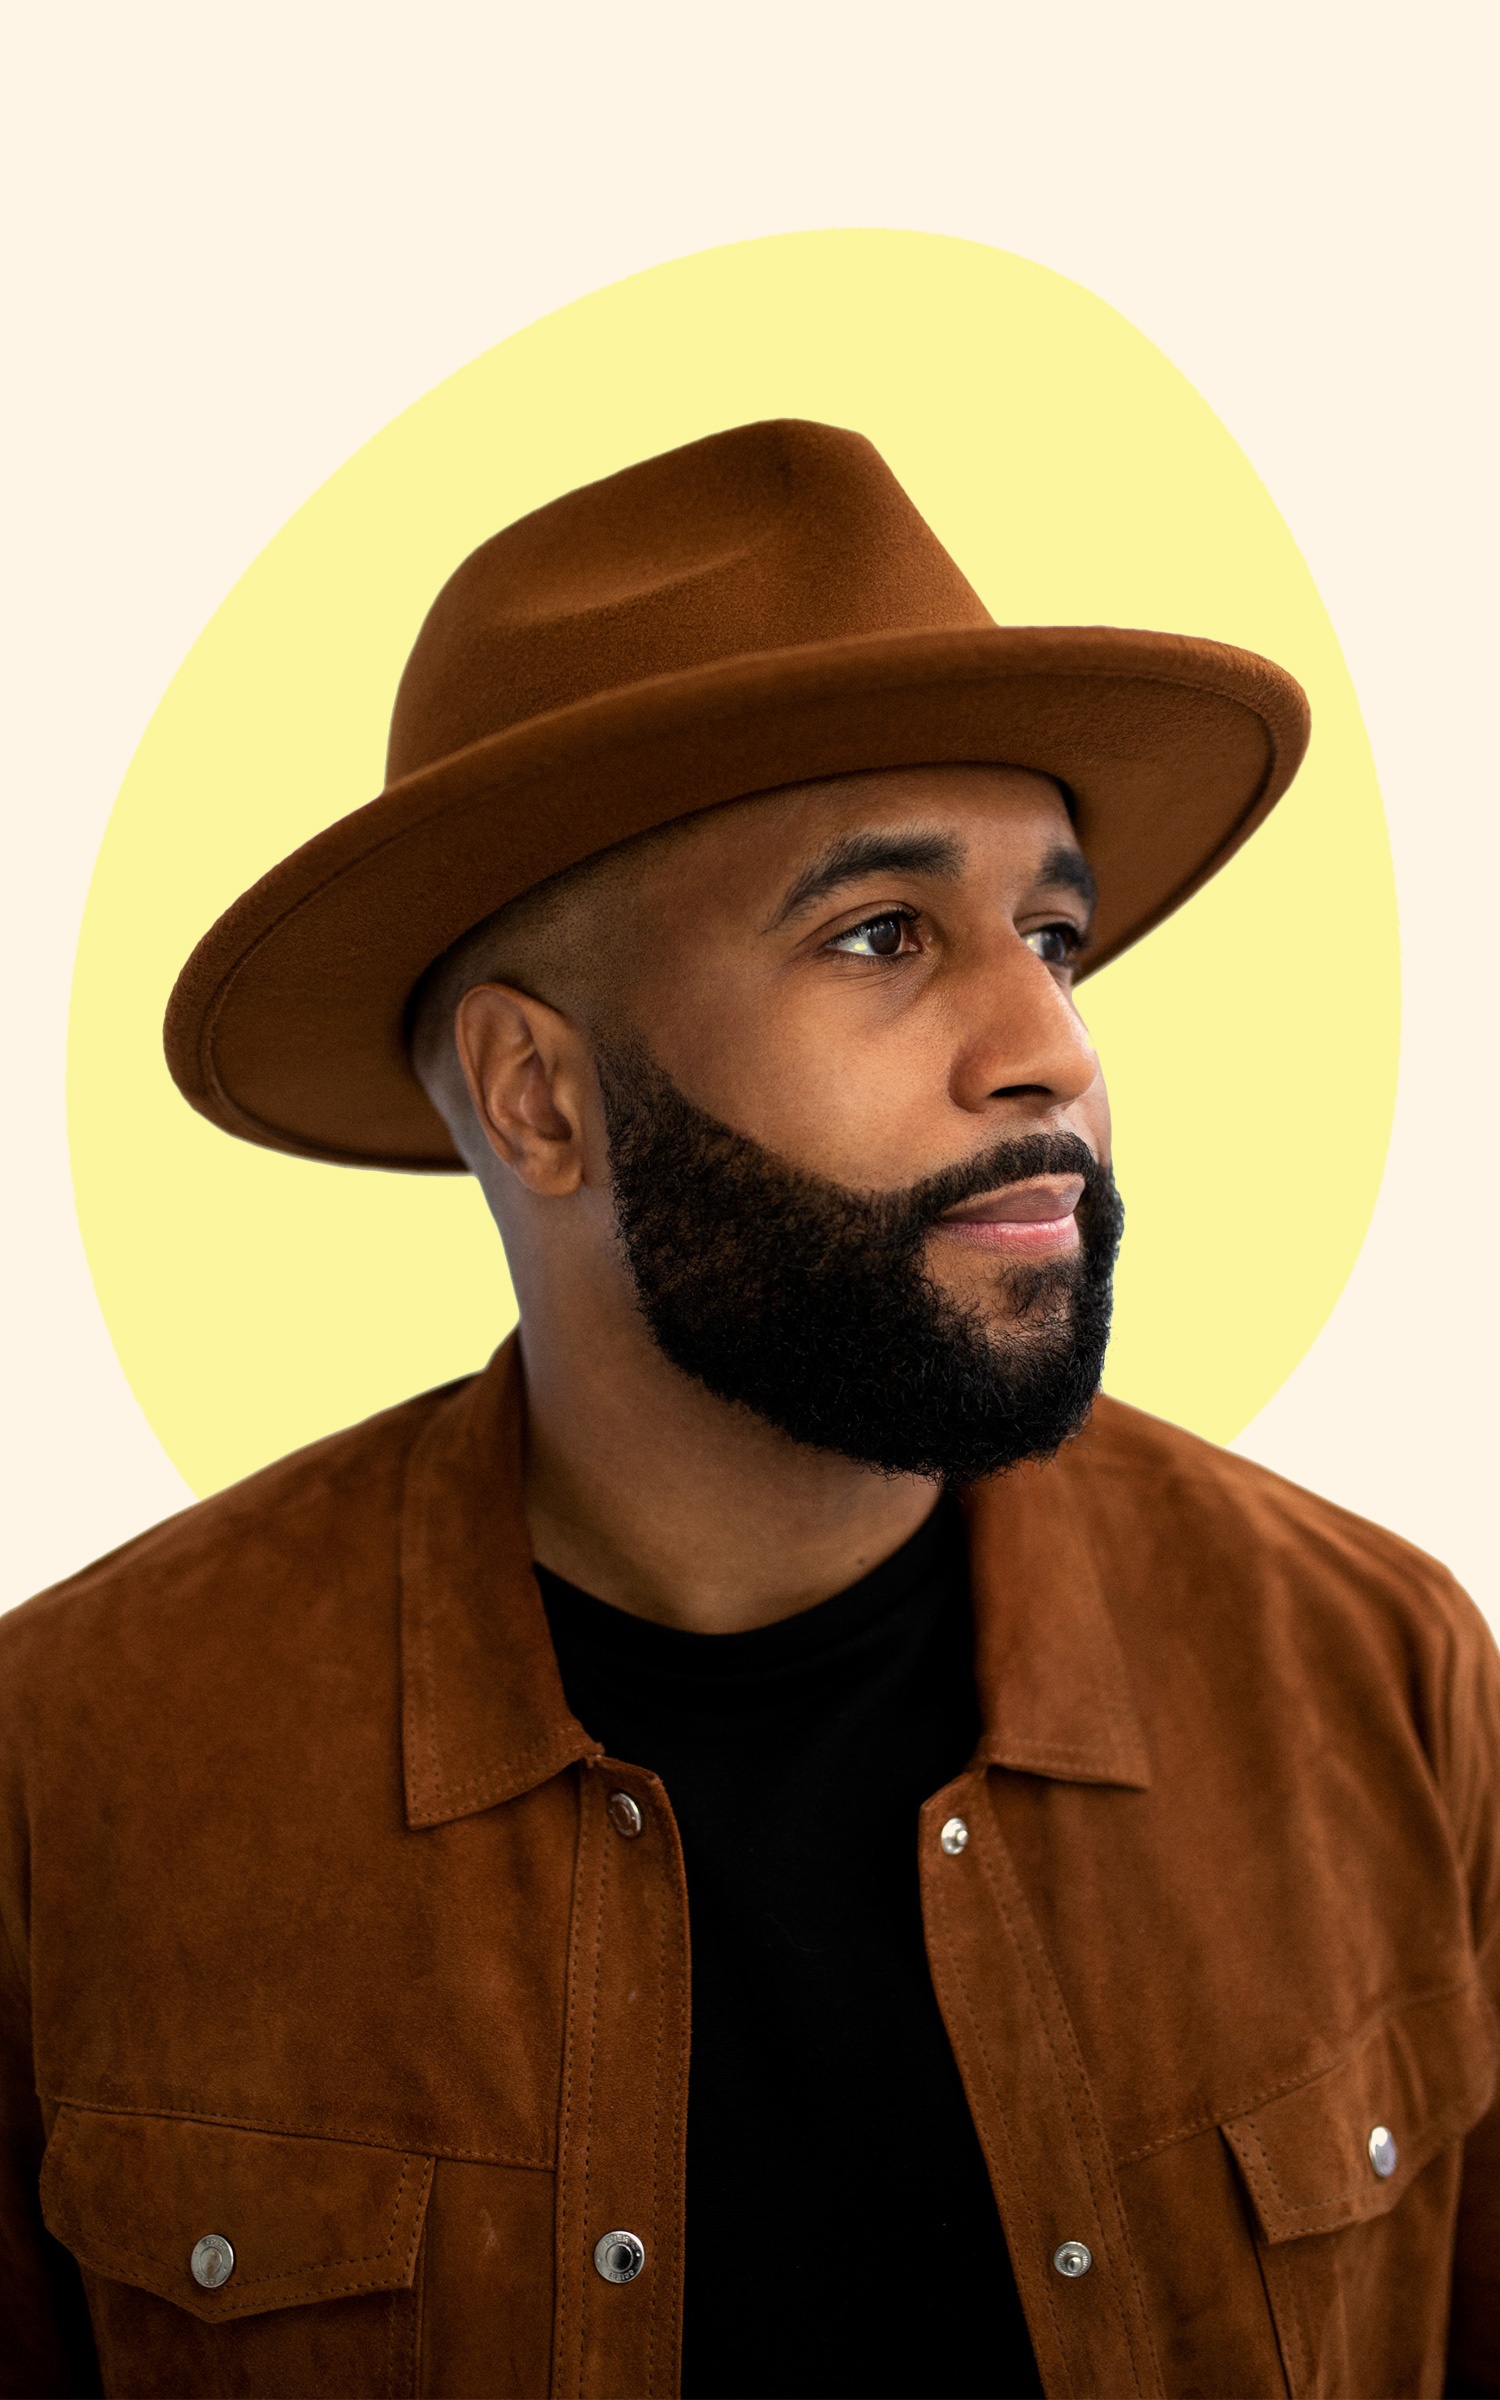 A Black man with a beard and mustache wearing a brown suede shirt and brimmed hat. The background behind him gives the effect of a yellow halo behind his head. 